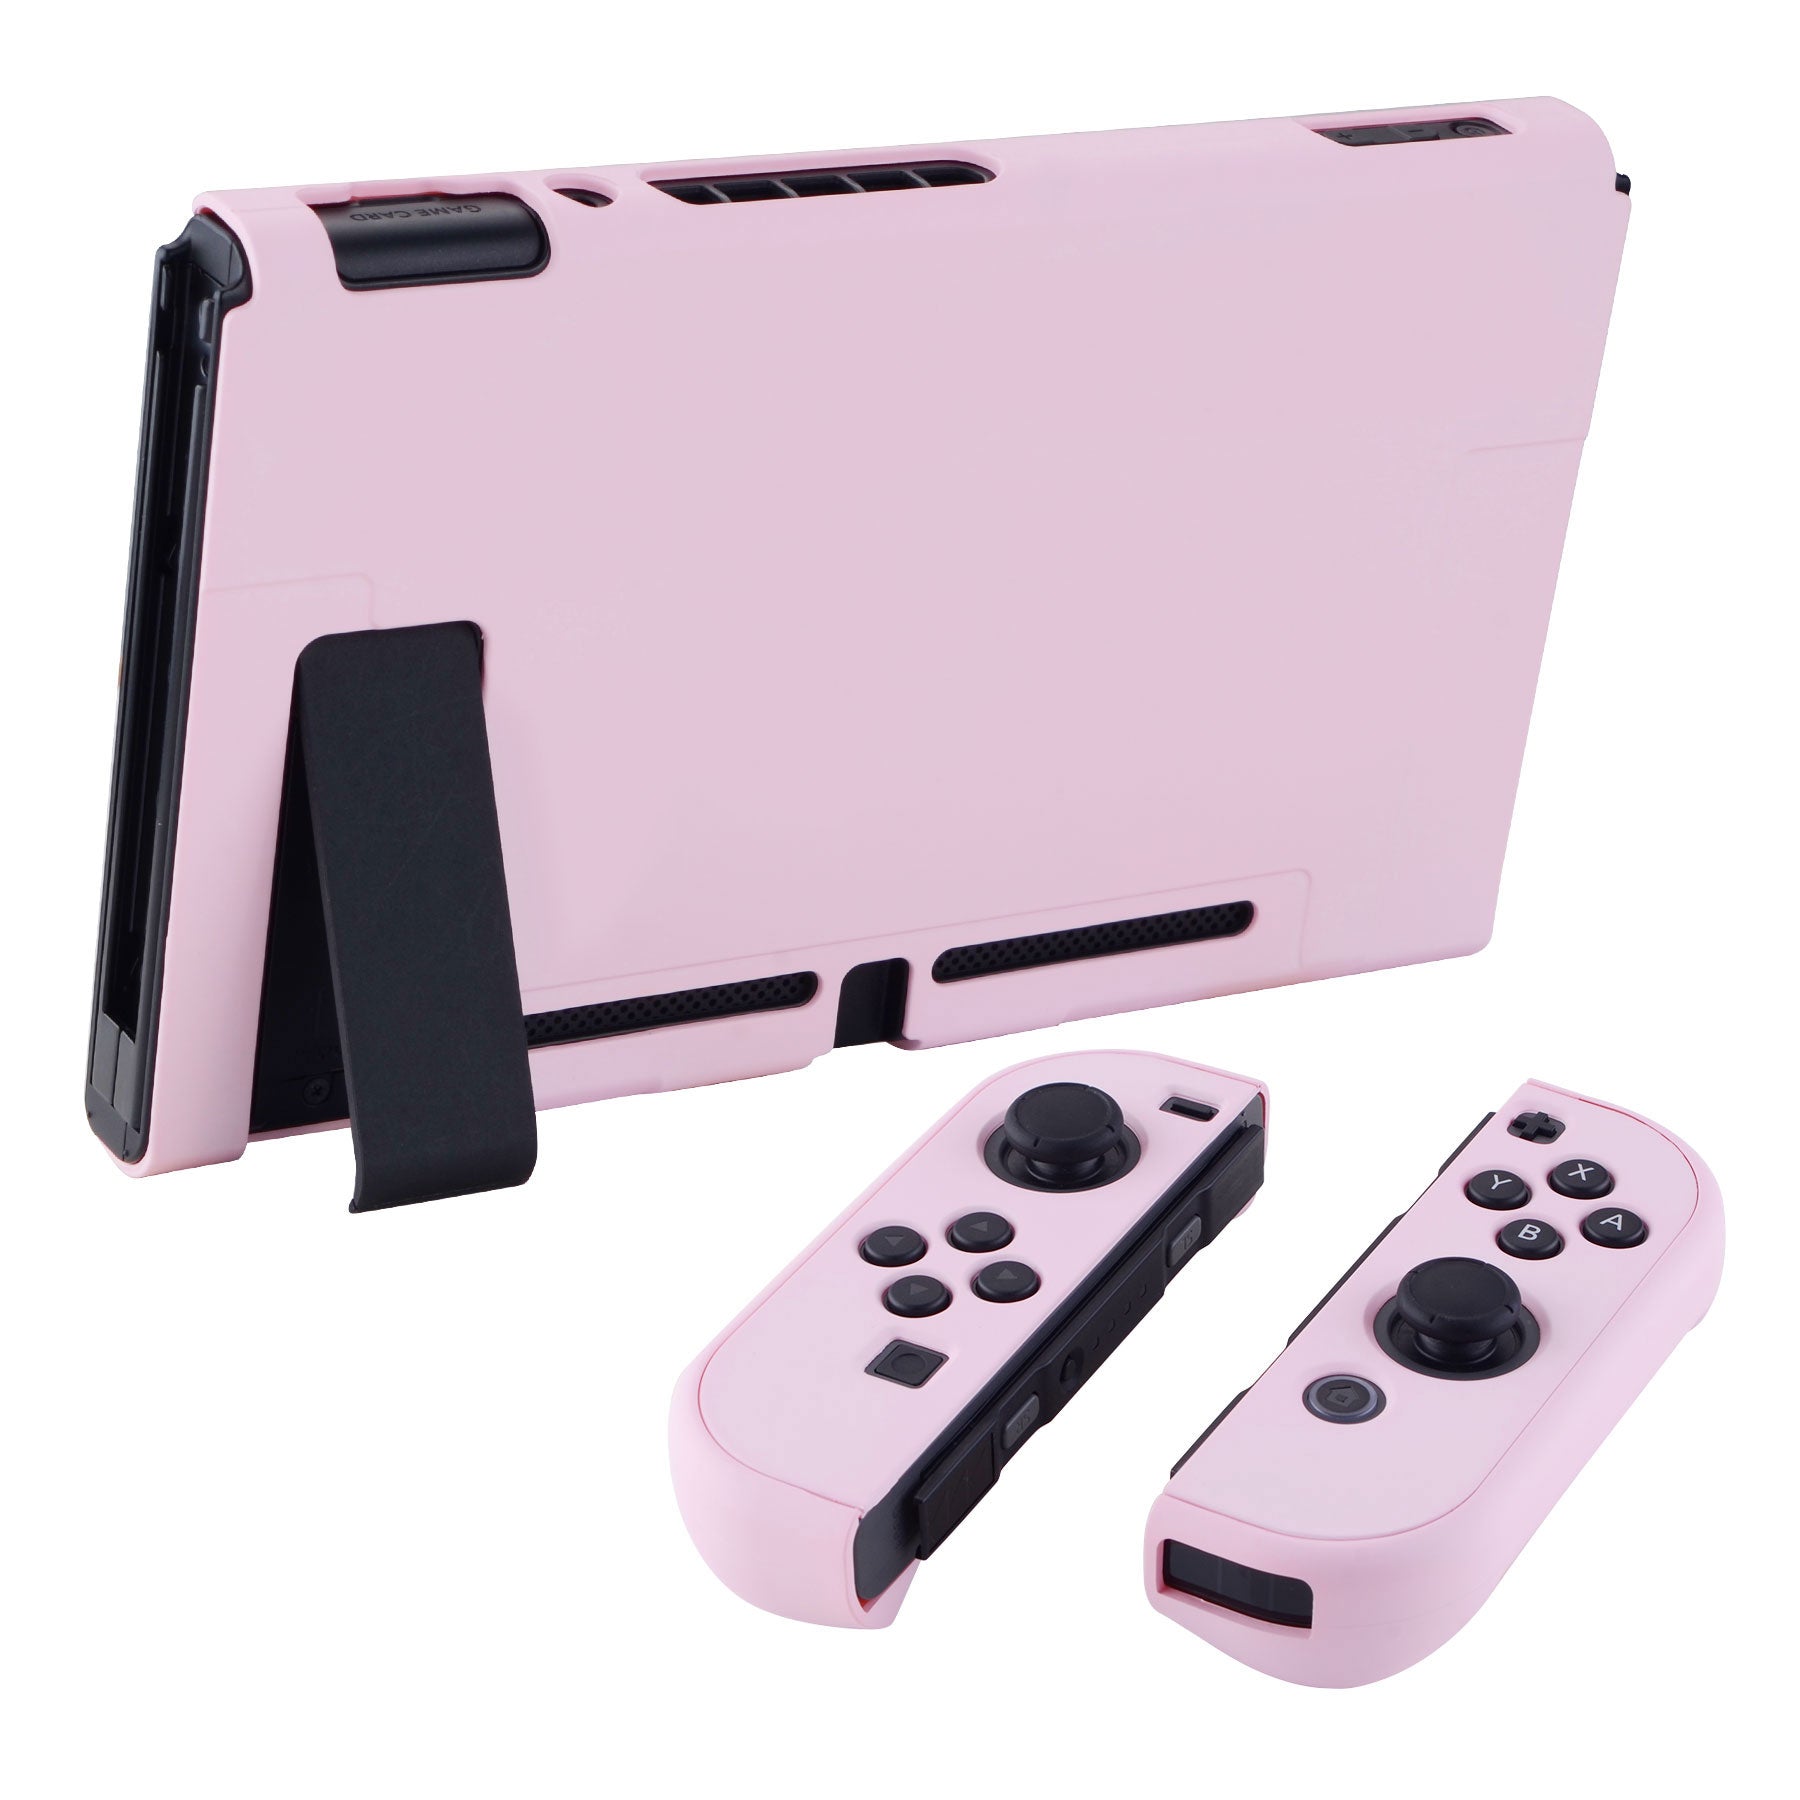 PlayVital Cherry Blossoms Pink Back Cover for Nintendo Switch Console, NS Joycon Handheld Controller Separable Protector Hard Shell, Soft Touch Customized Dockable Protective Case for Nintendo Switch - NTP312 PlayVital